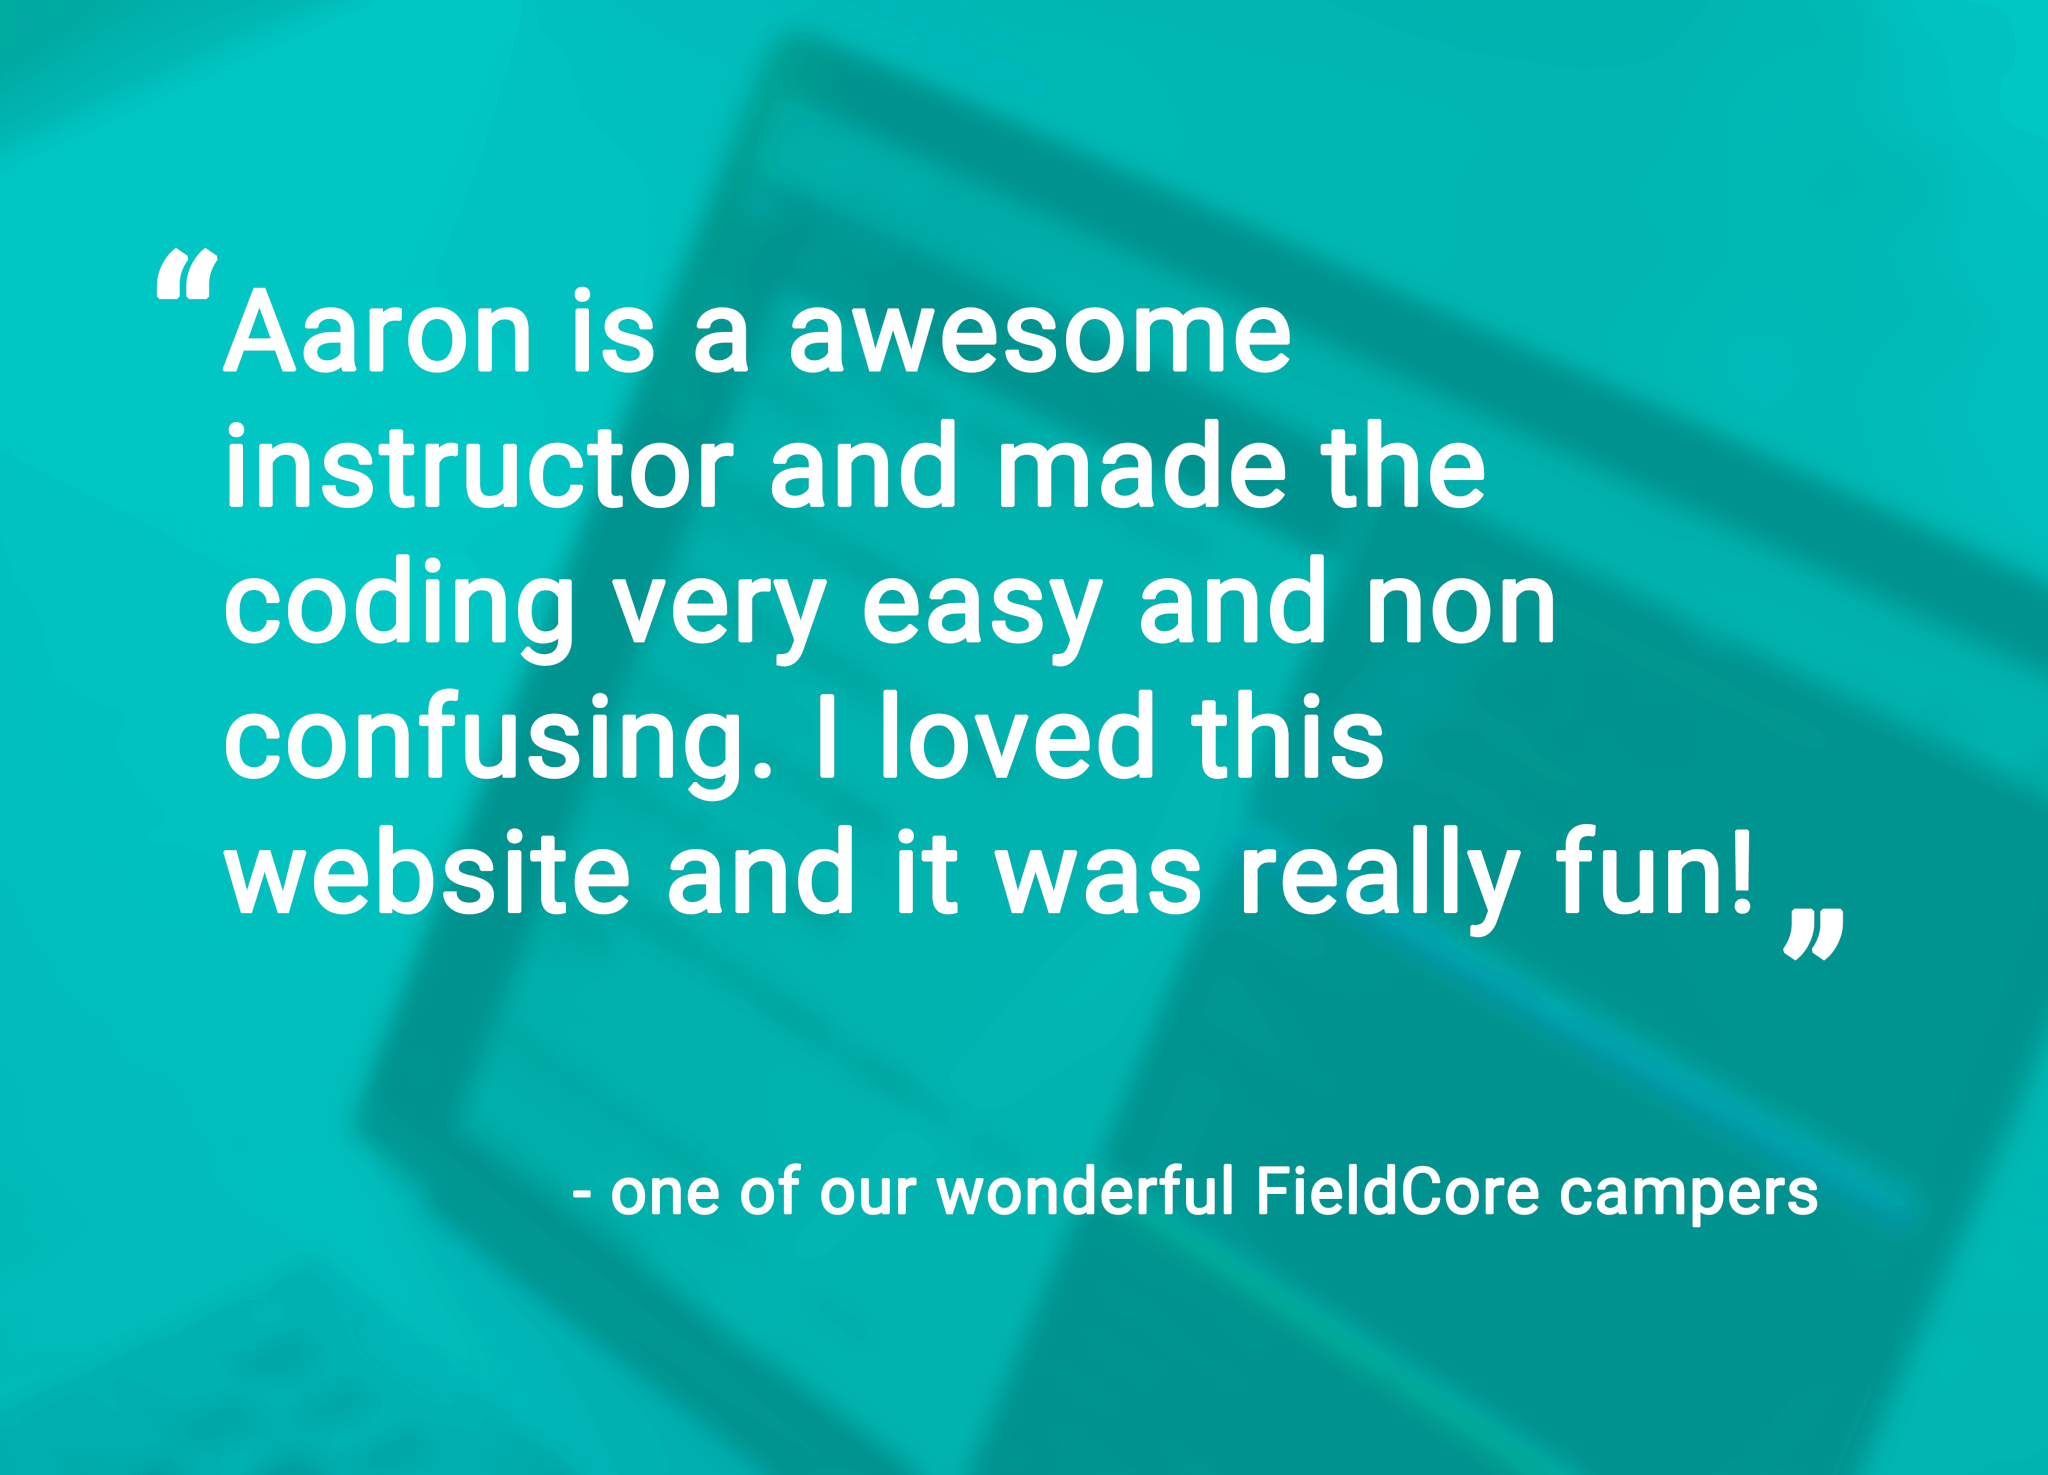 "Aaron is an awesome instructor and made the coding very easy and non confusing. I loved this website and it was really fun!? - one of our wonderful FieldCore campers